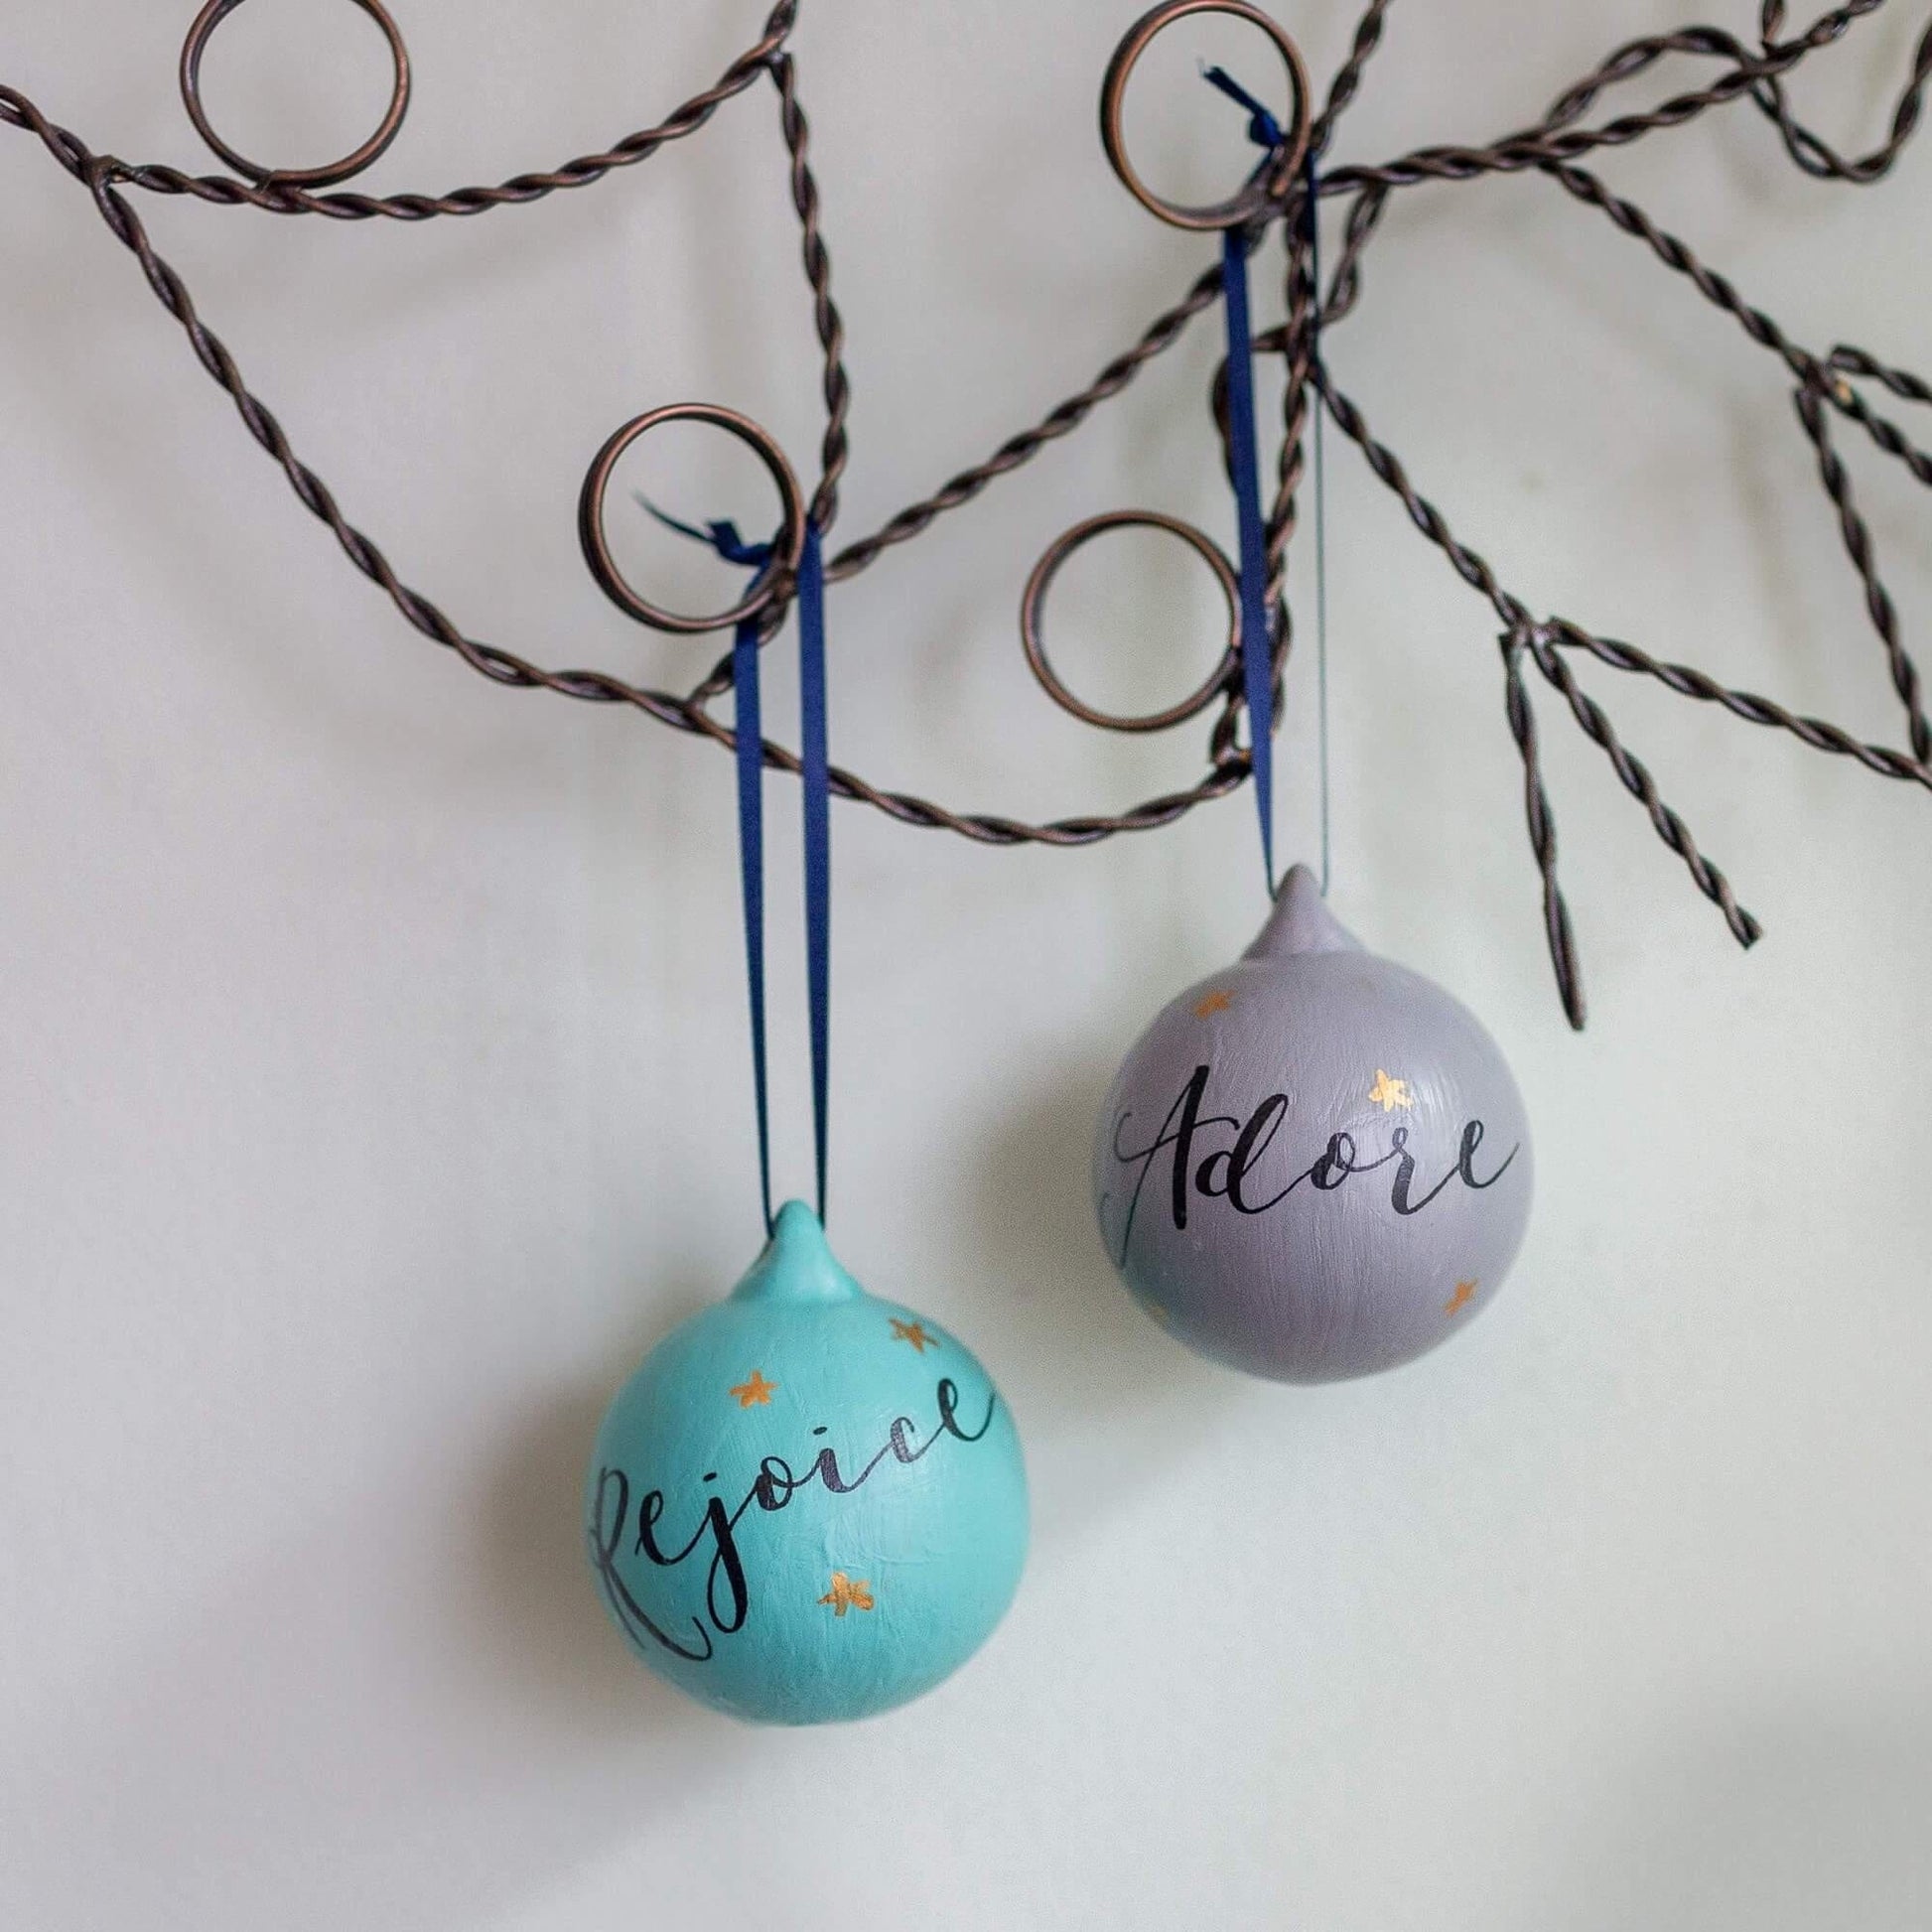 Mint green and light grey ceramic baubles with calligraphy words